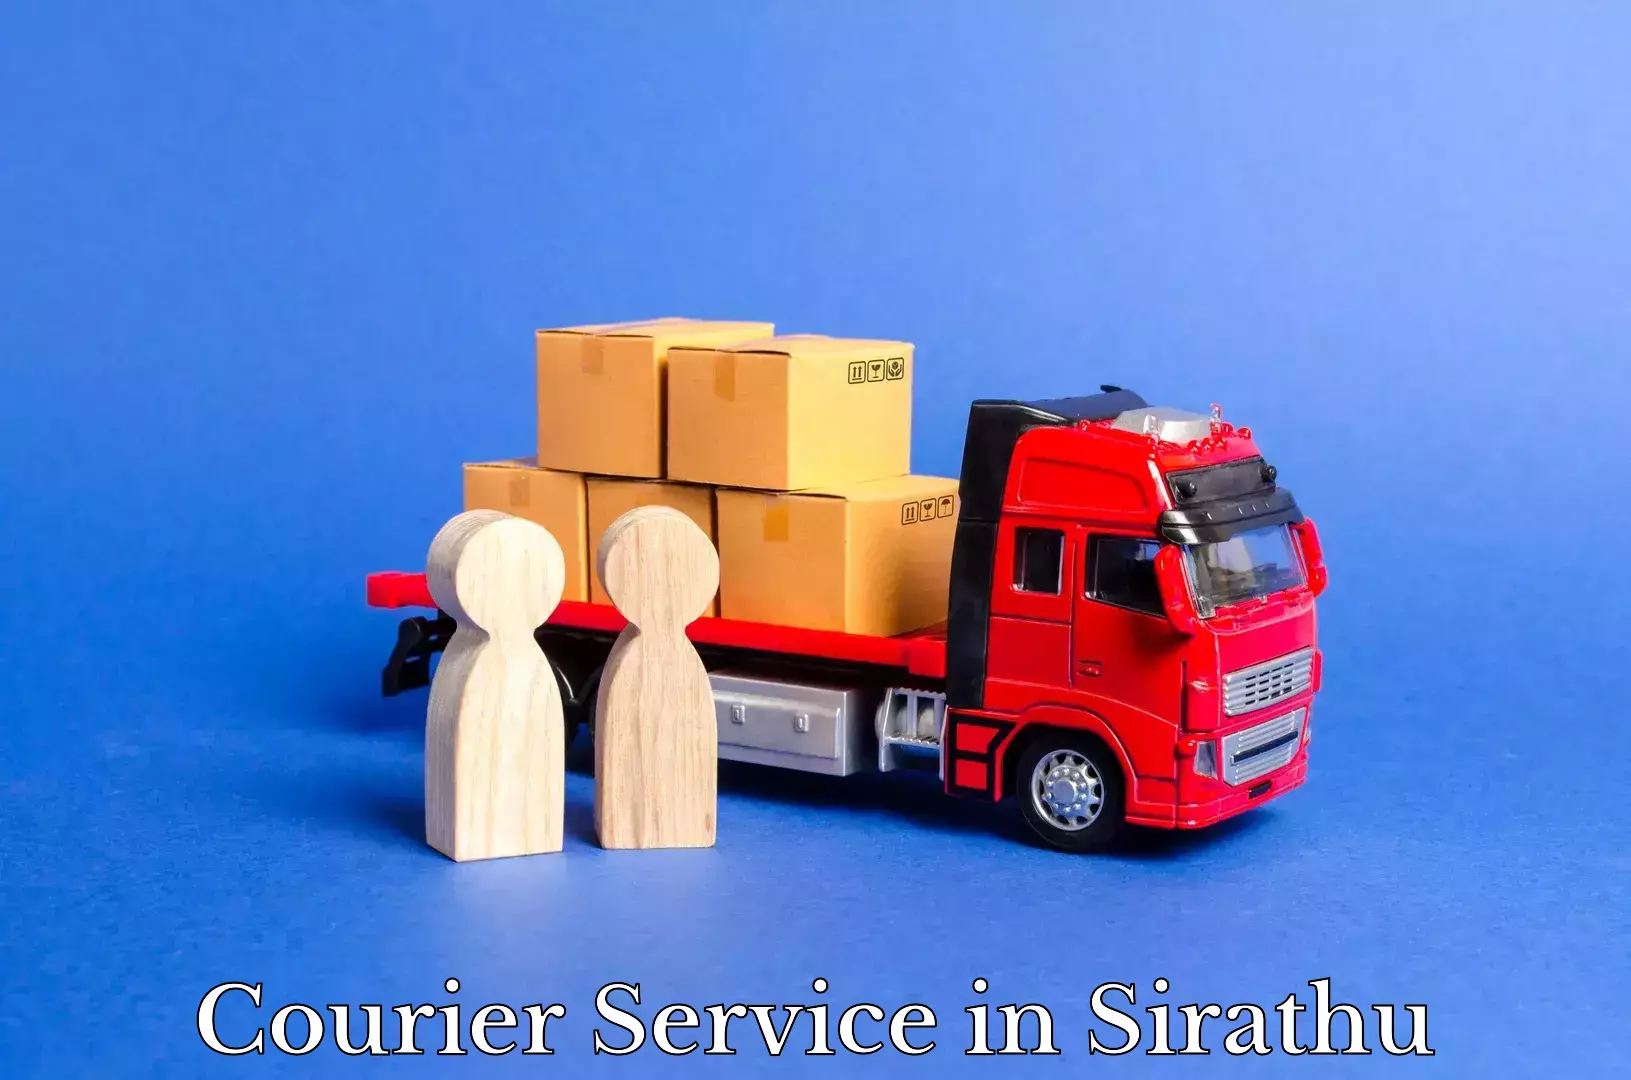 Courier service efficiency in Sirathu